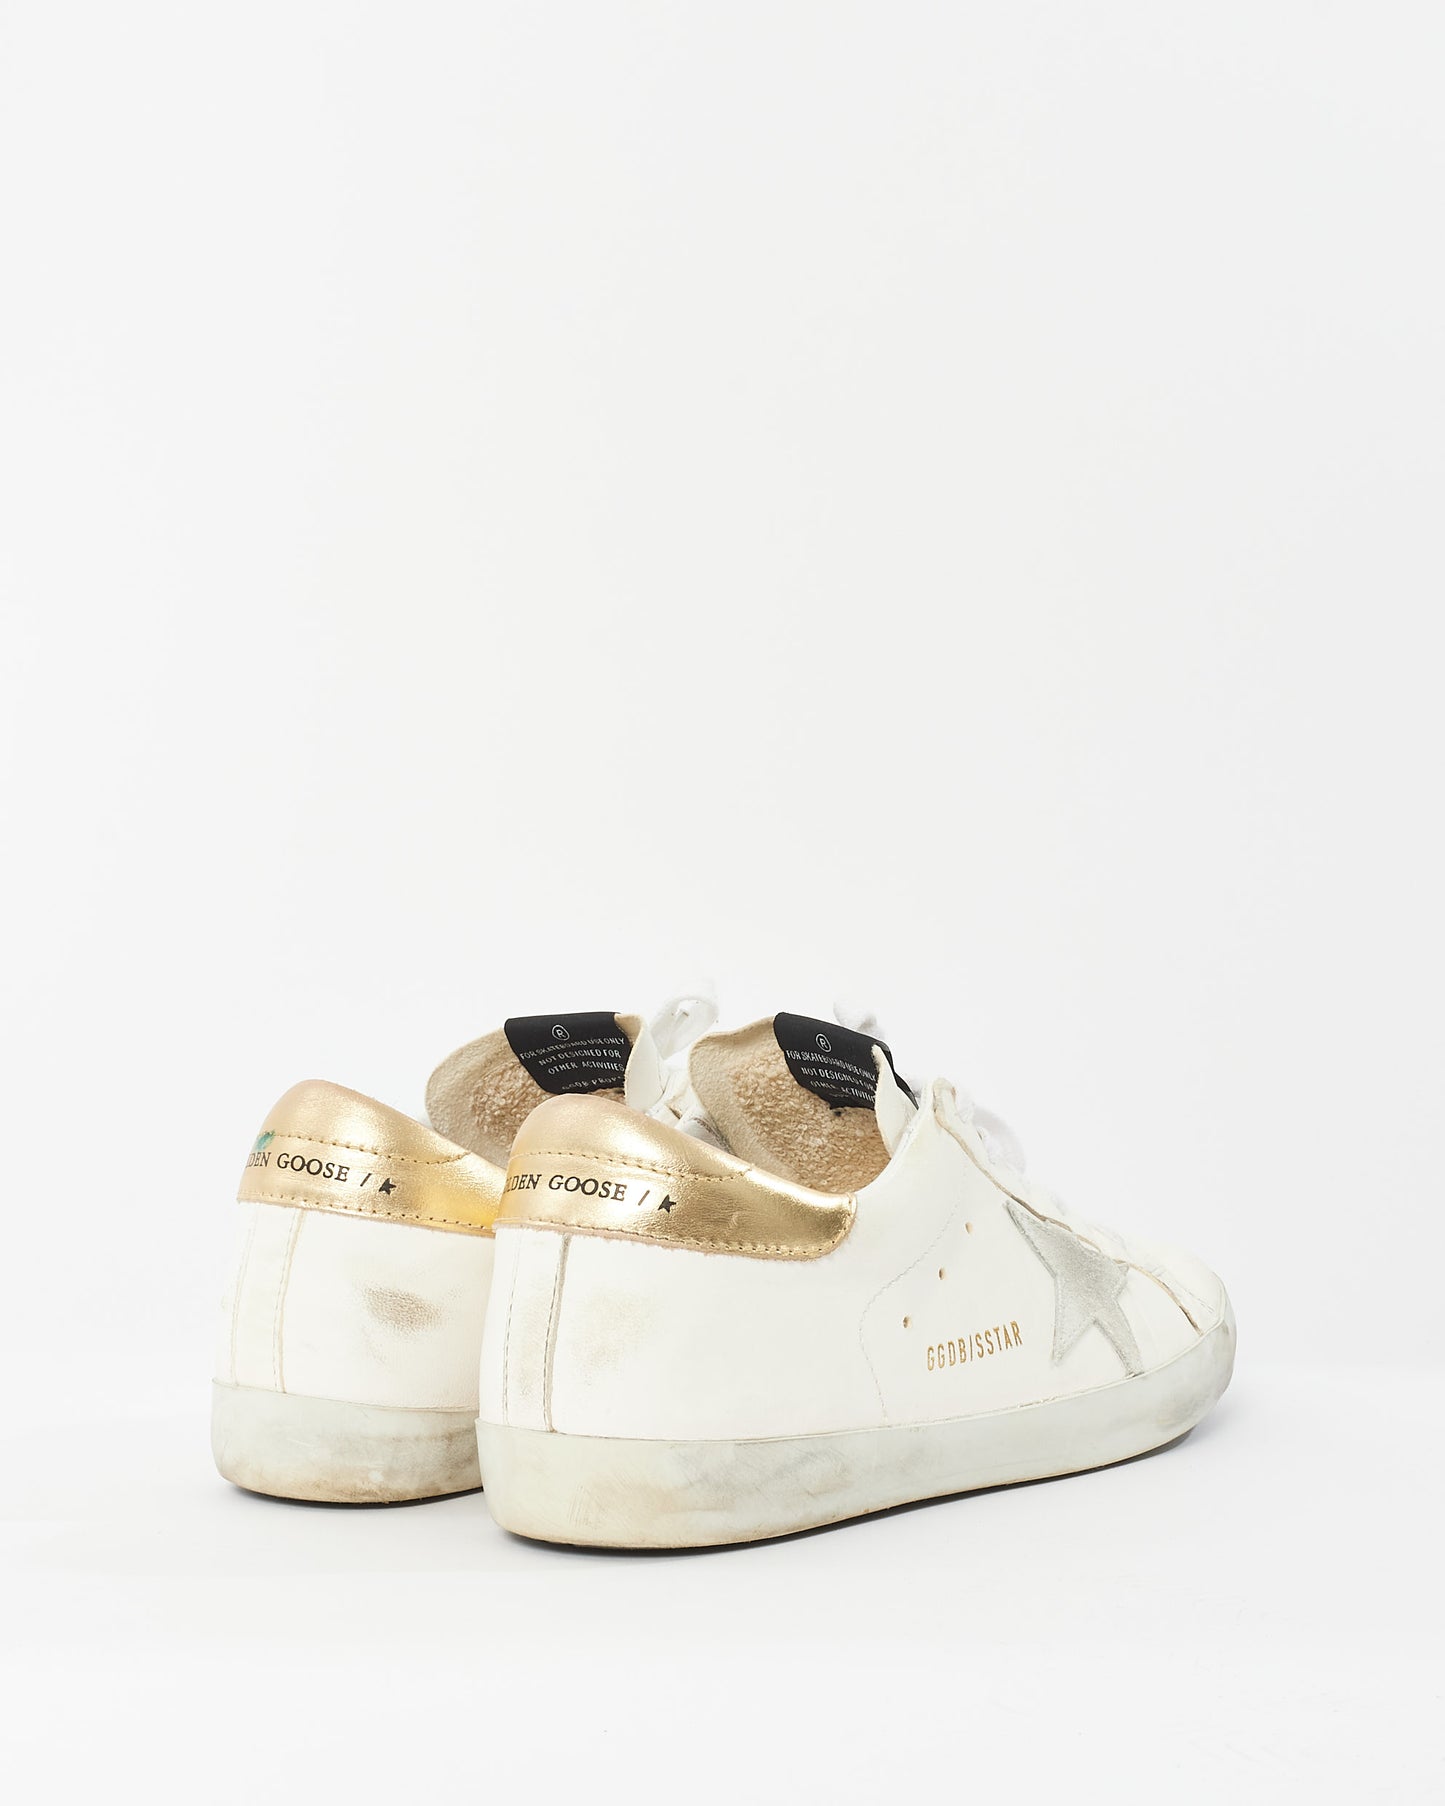 Golden Goose White Leather & Gold Superstar Sneakers - 41